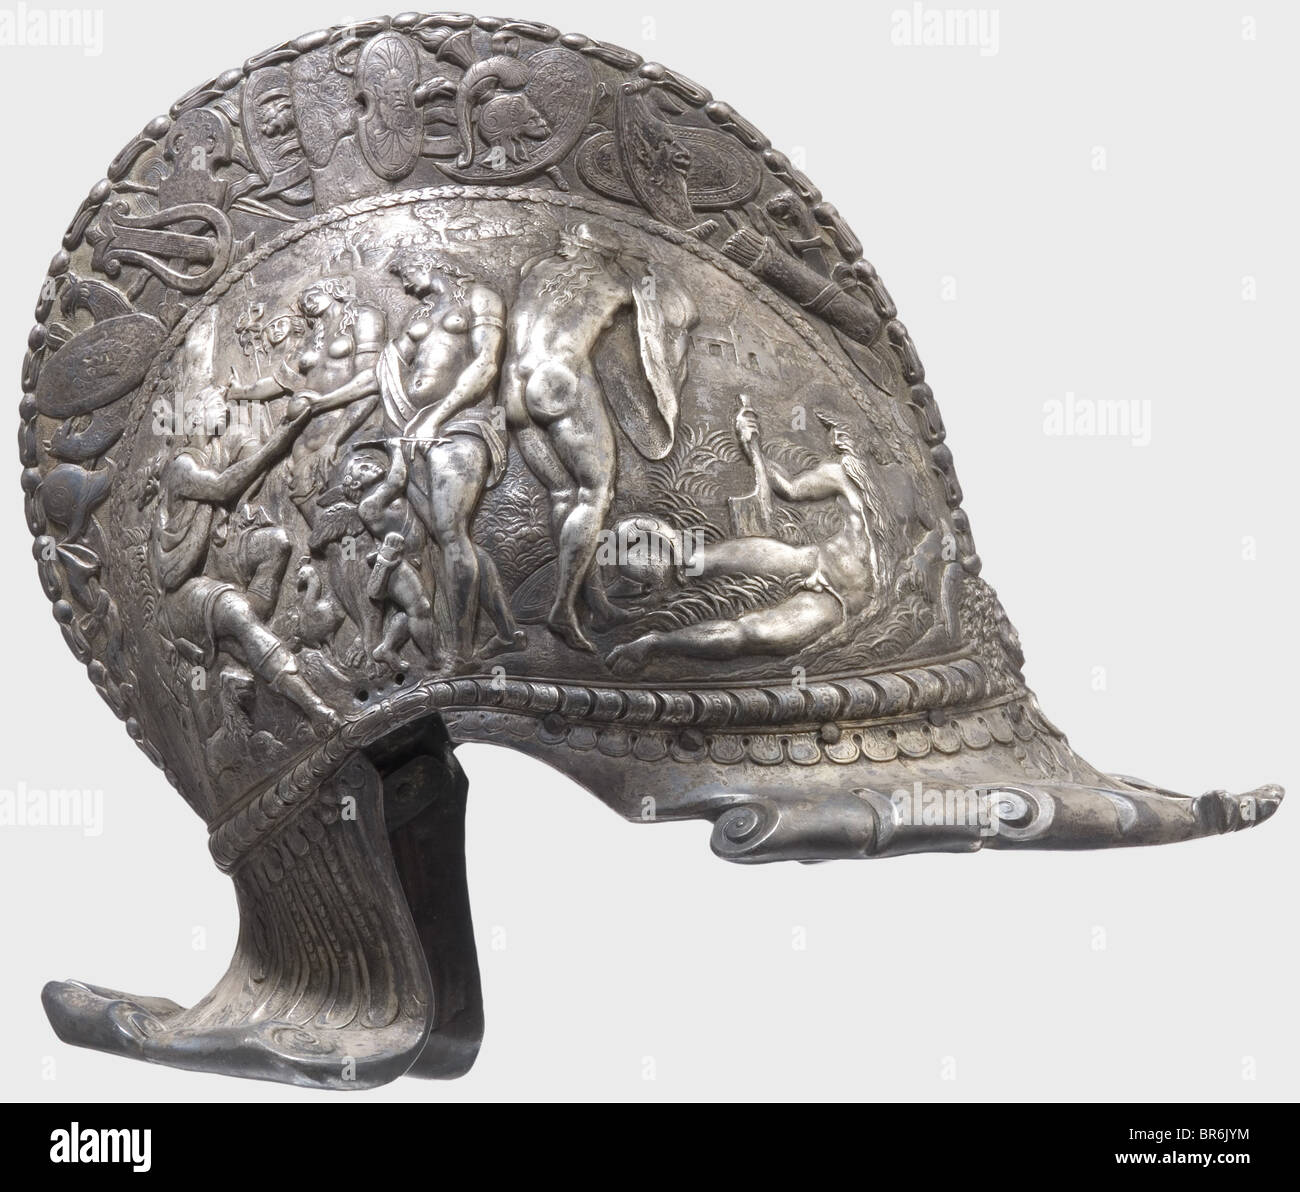 A silver-plated ceremonial helmet, in the style of the 16th century. Silver electroplated on copper. Made in one piece with a high comb and turned under, hollow-worked visor and neck guard. A depiction of the Judgement of Paris in half-relief on one side and one of the Abduction of Helen on the other. Each face of the comb displays trophies of war in relief. Very decorative helmet. Height 28.5 cm. historic, historical, 16th century, defensive arms, weapons, arms, weapon, arm, fighting device, object, objects, stills, clipping, clippings, cut out, cut-out, cut-o, Stock Photo